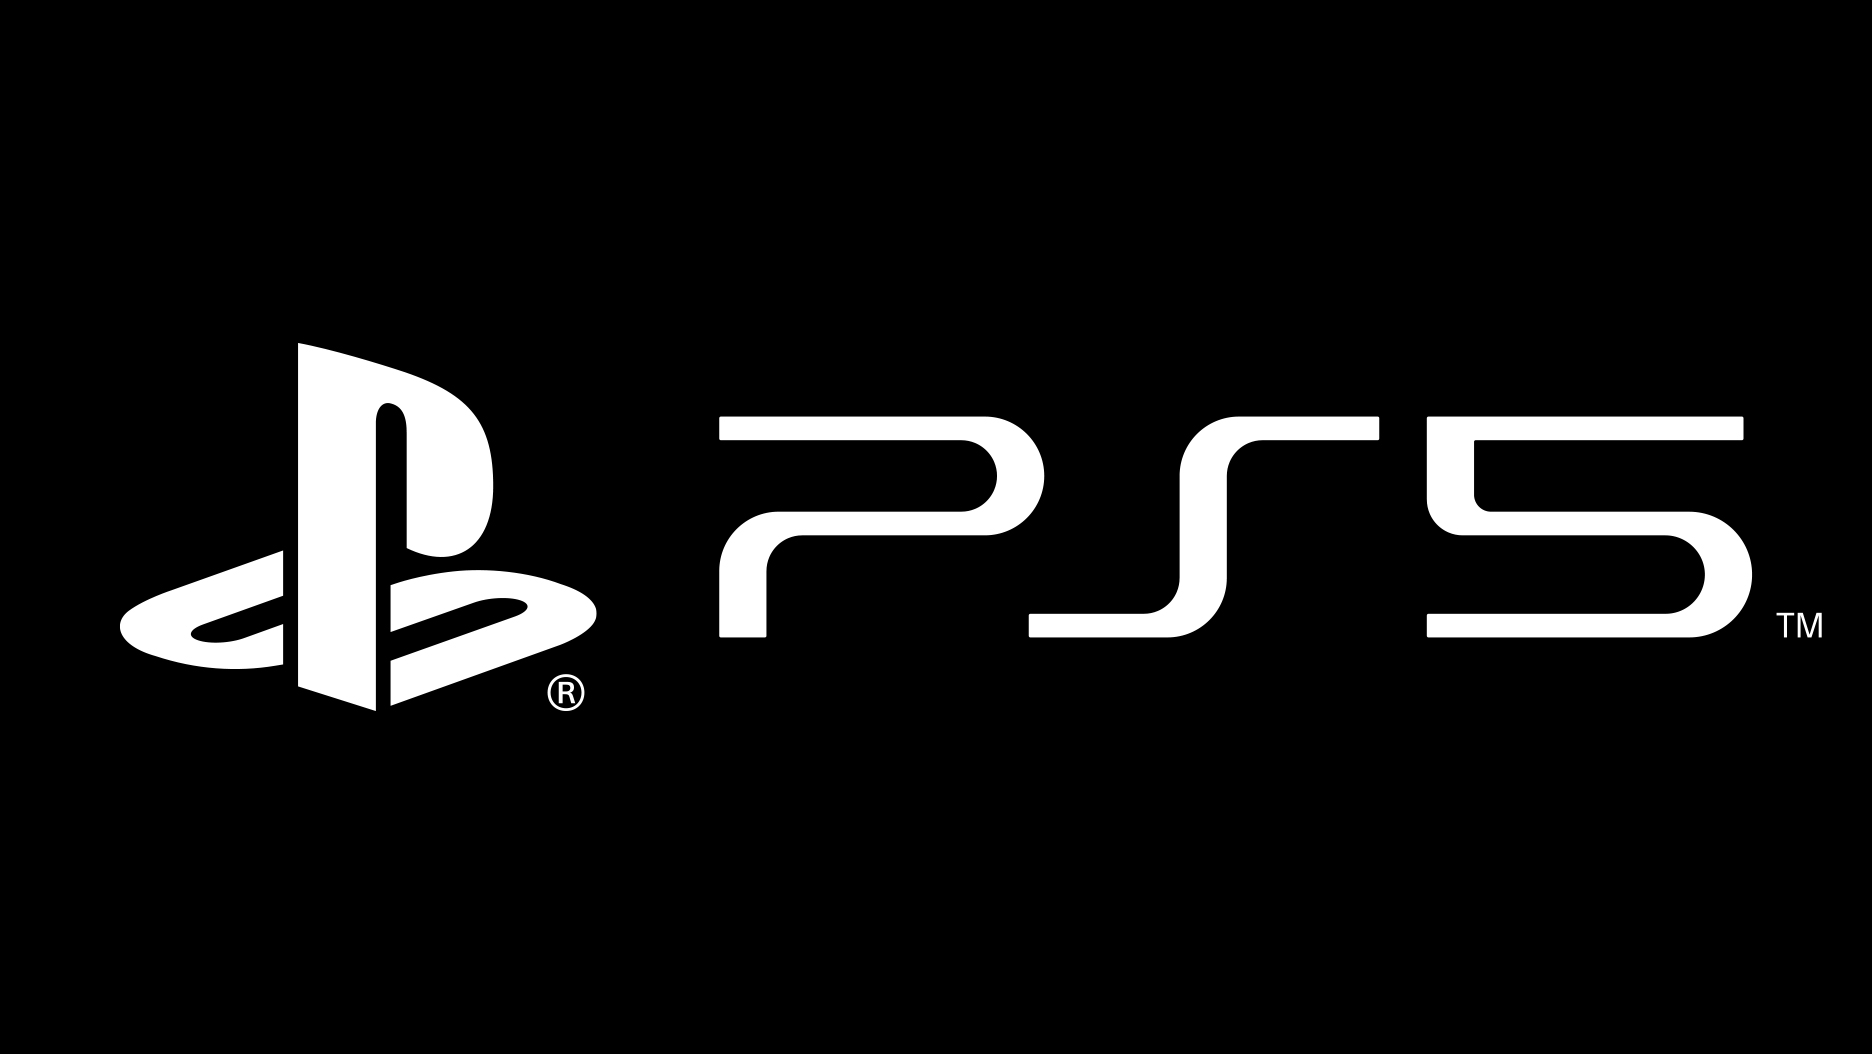 official release date of ps5